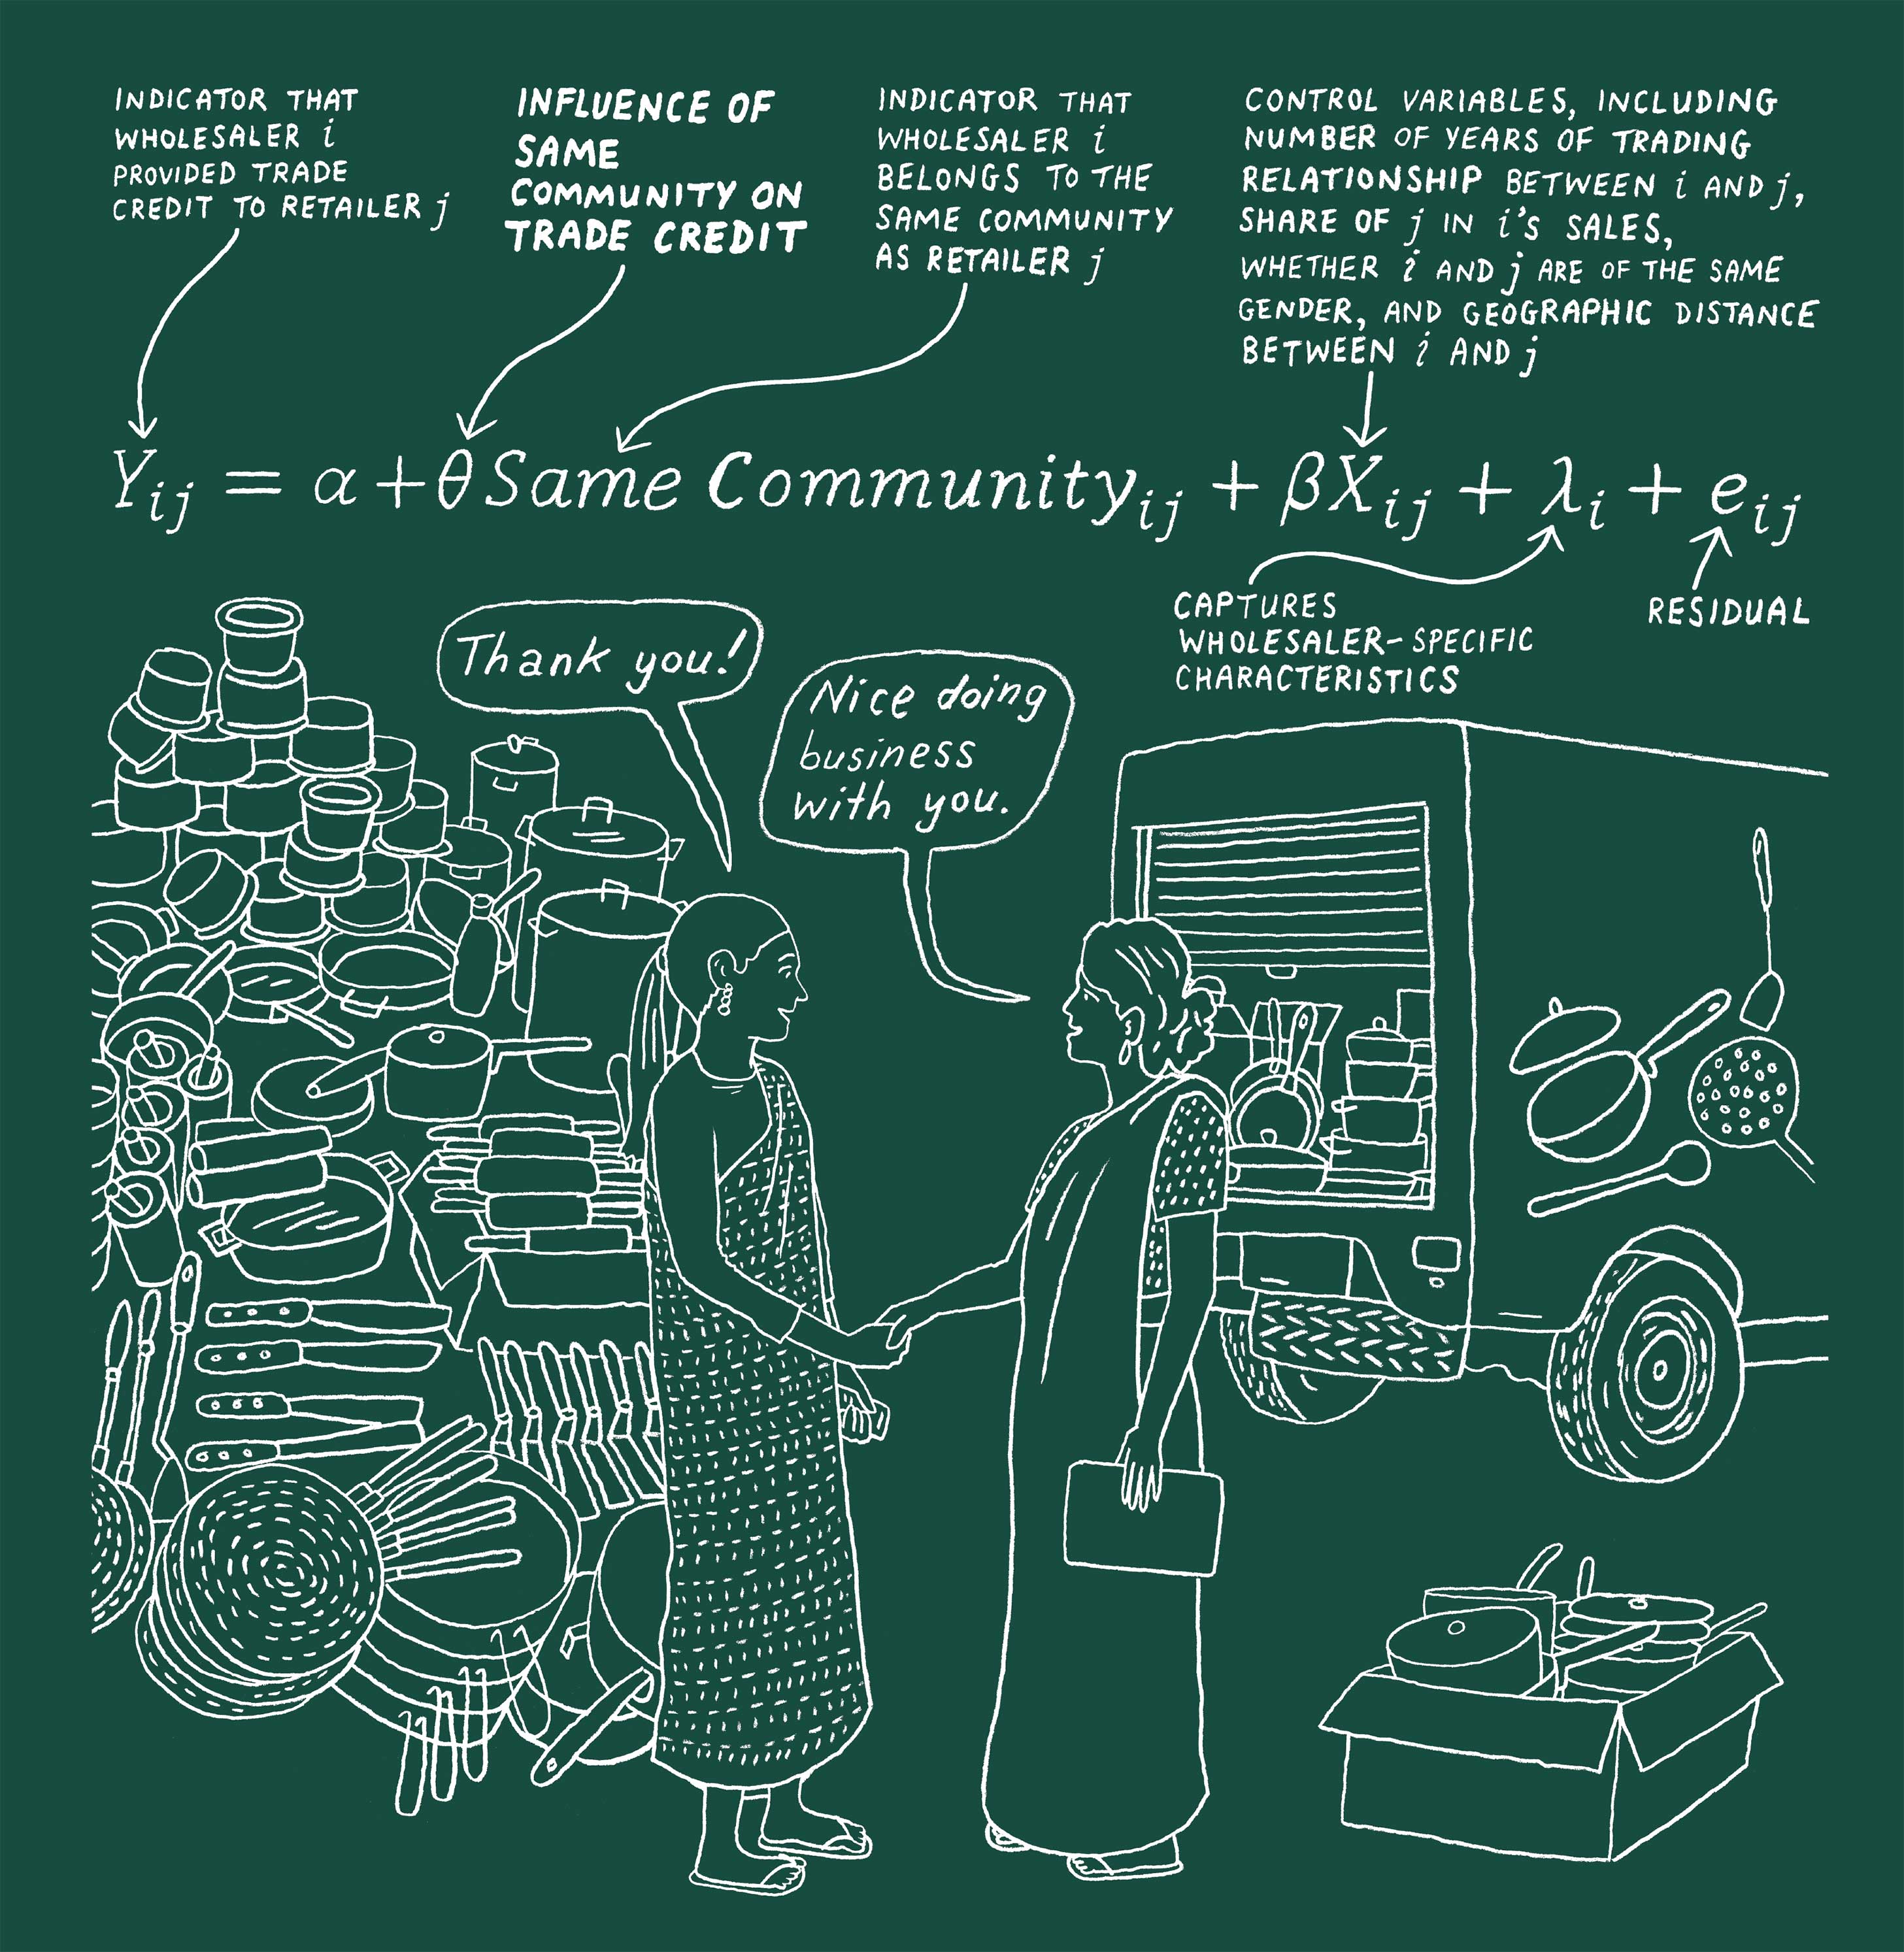 Academic equation showing how community membership affects trade credit, with chalkboard-style drawing of a retailer and wholesaler below